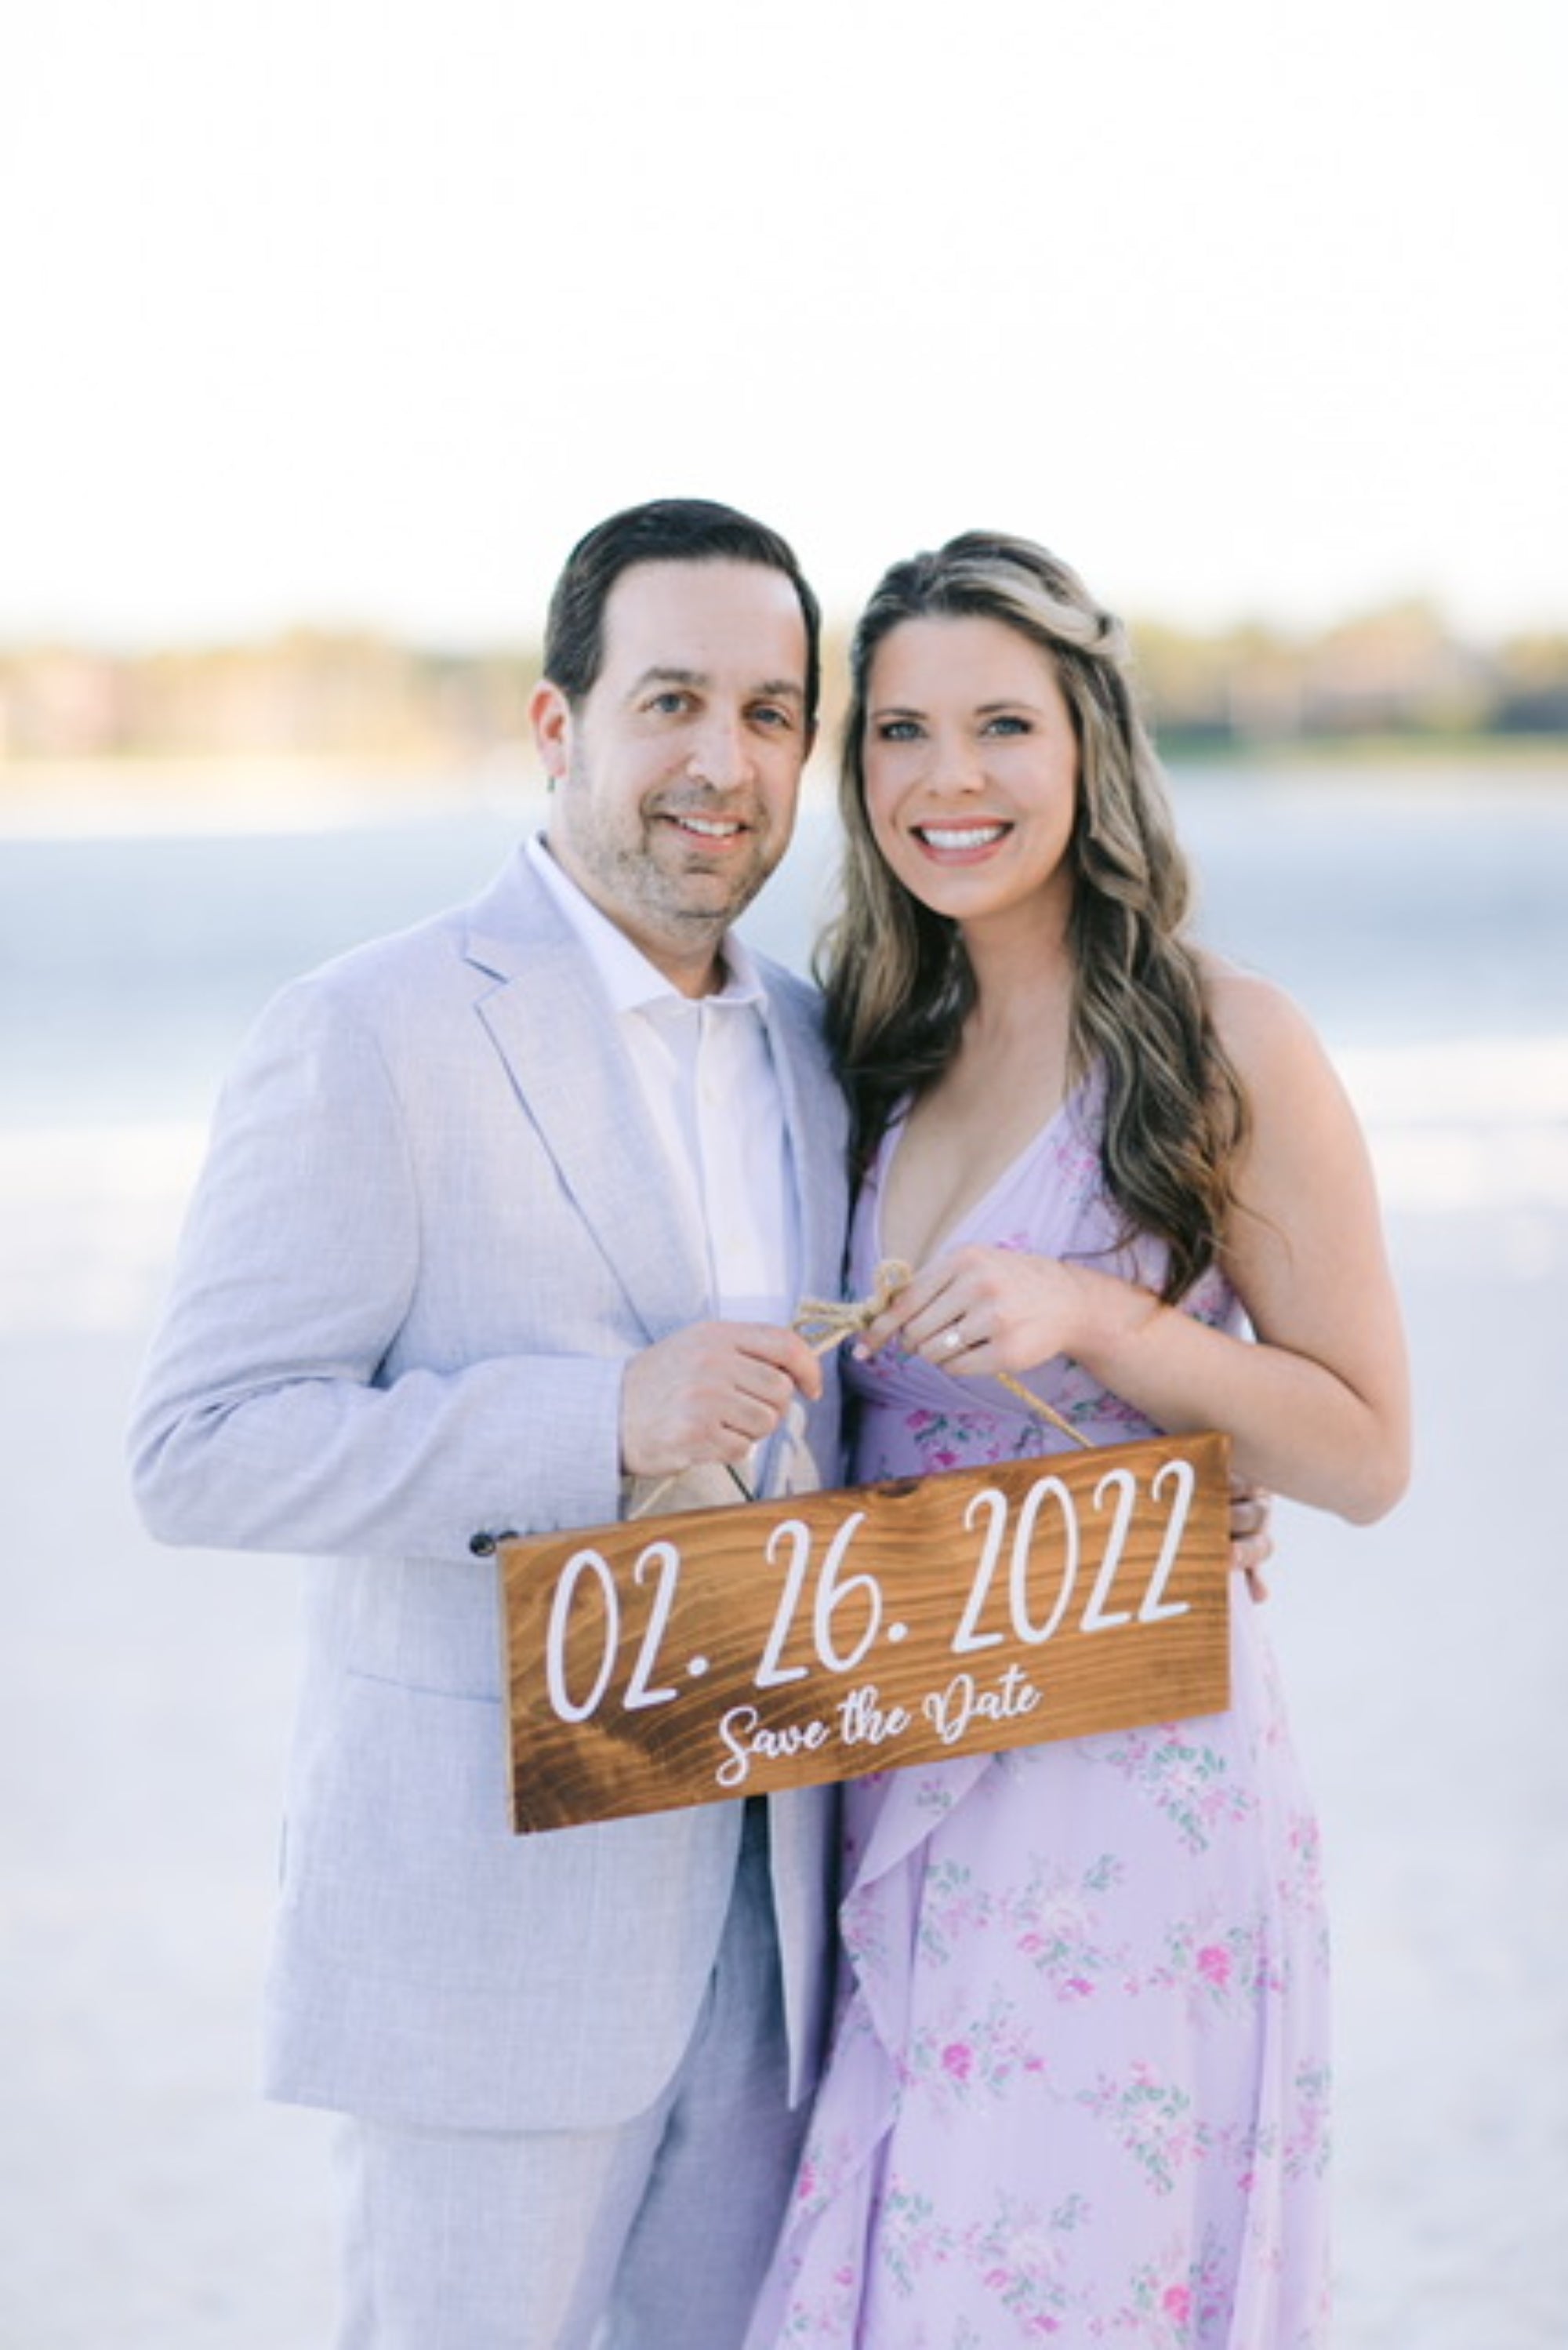 Top 10 Interesting Save the Date Ideas for Couples